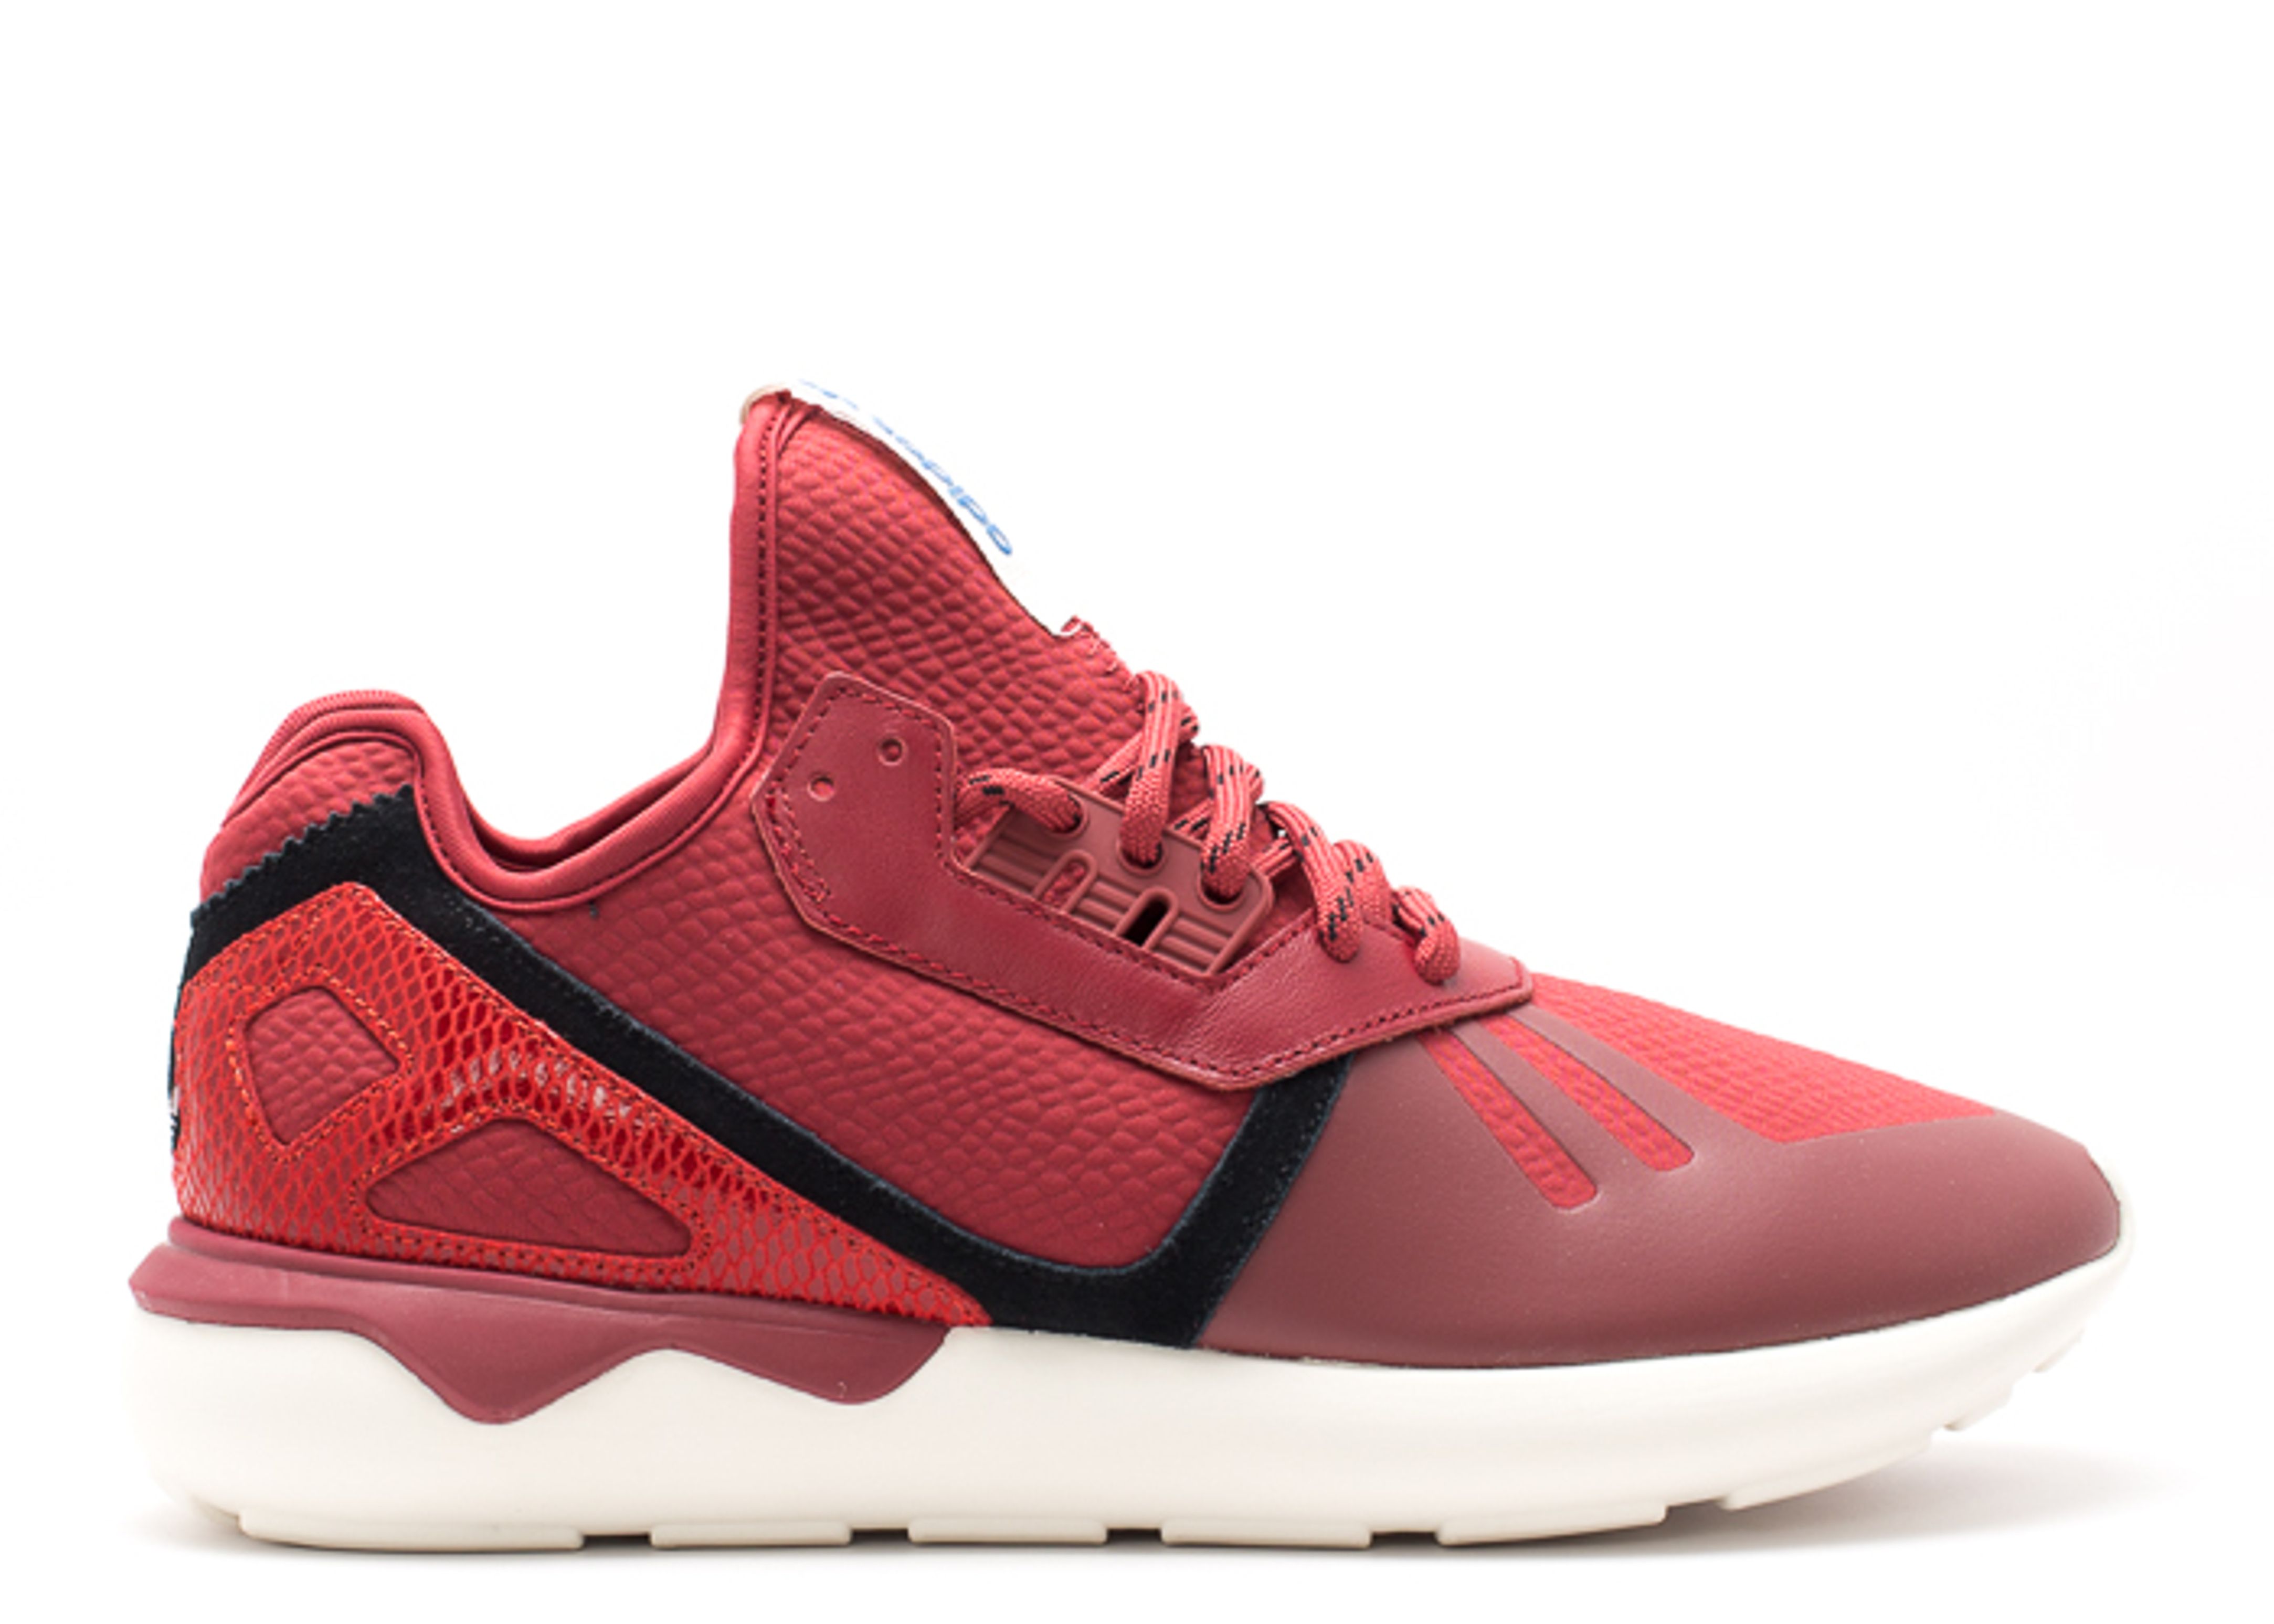 Adidas tubular women for sale Jerry N. Weiss